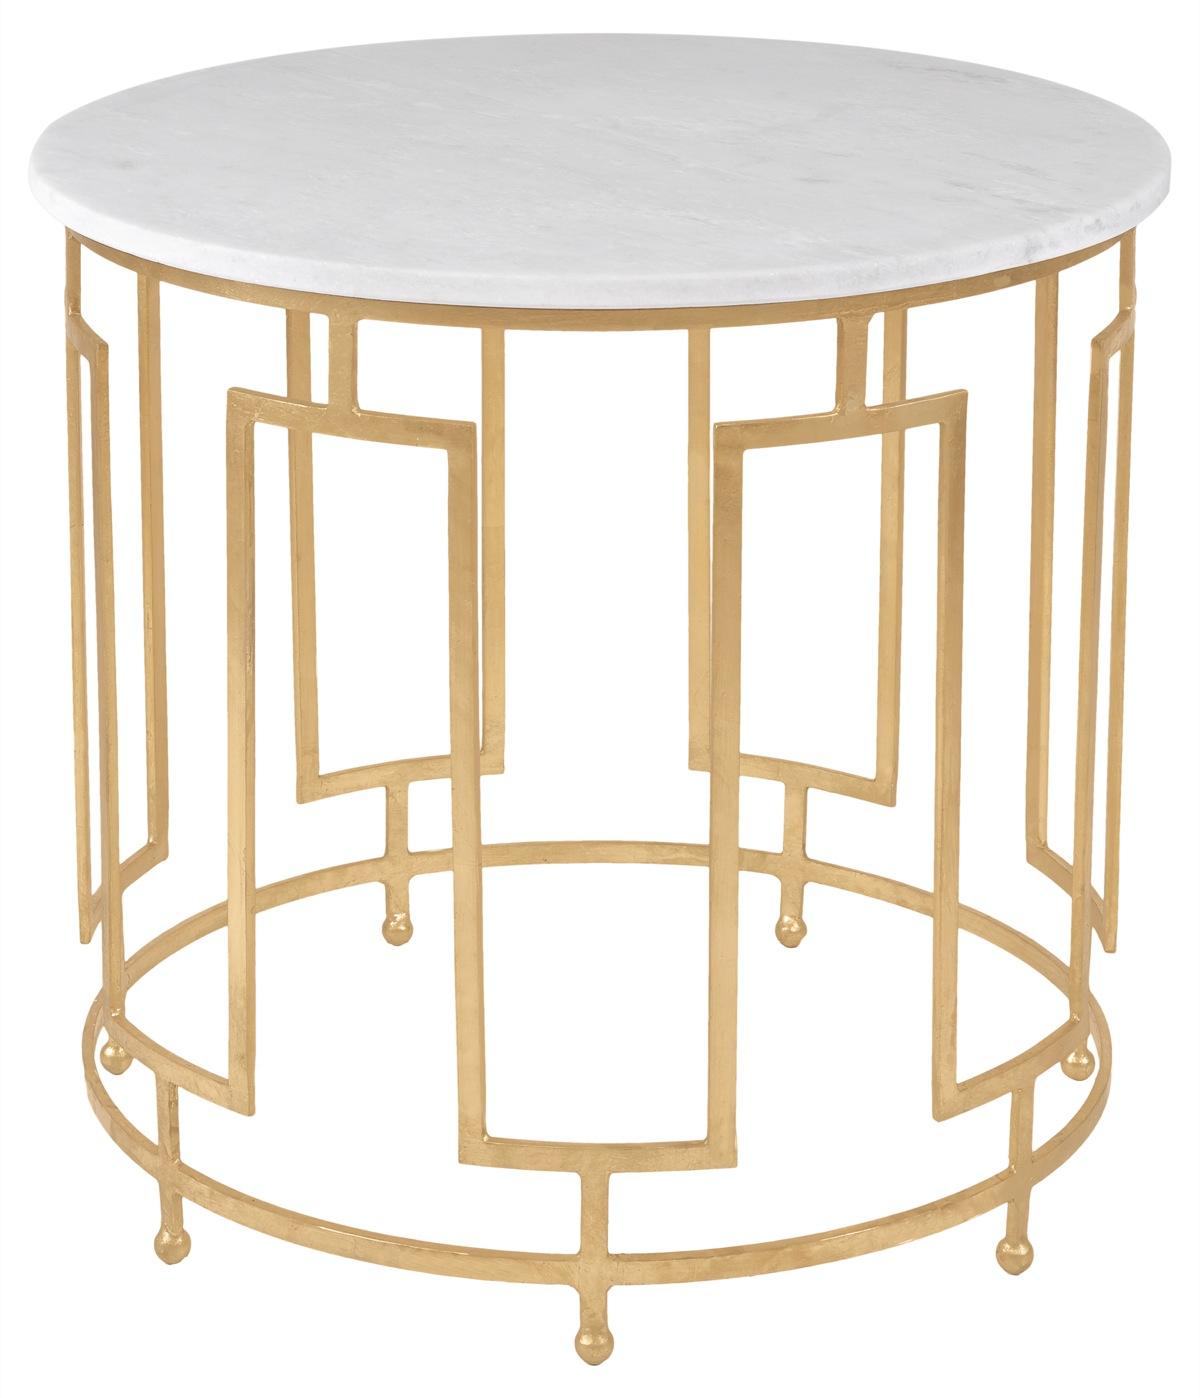 safavieh front gold leaf accent table yellow umbrella rope lamp round black glass side bbq prep cart off white coffee and end tables outdoor wicker with hole home decor wood